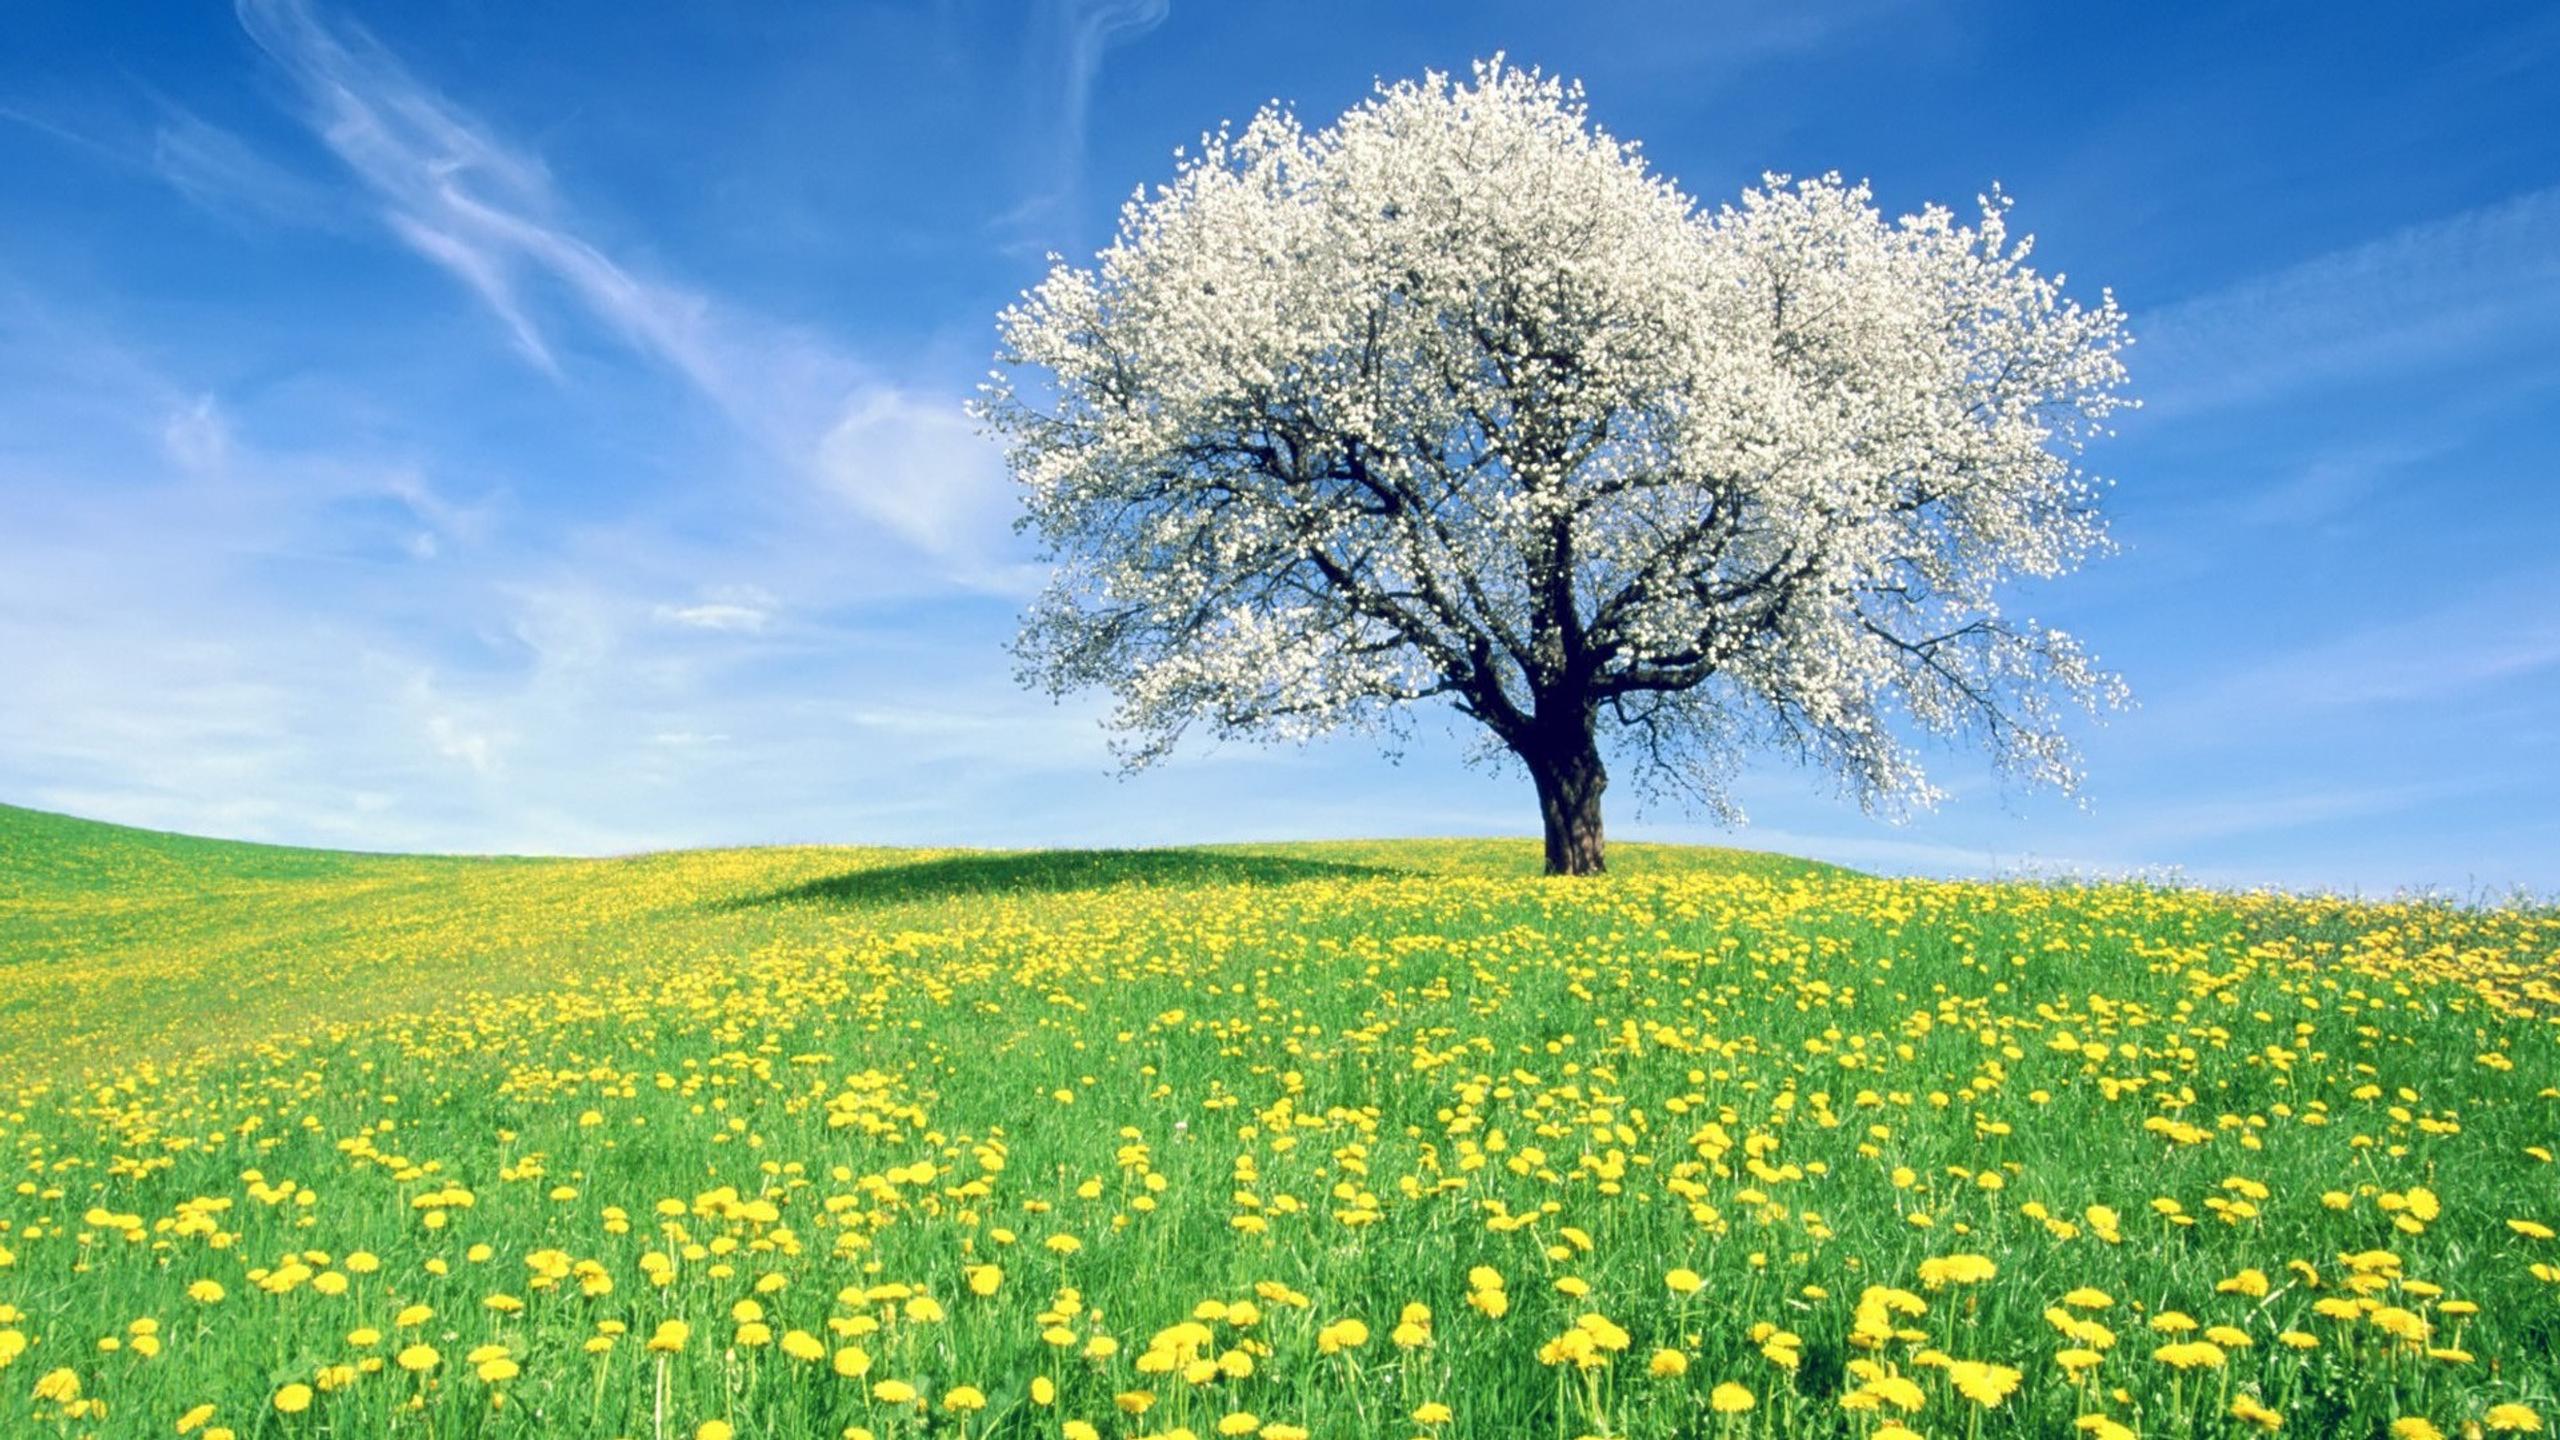 Field full with dandelion flowers and a blossom tree Wallpaper Download